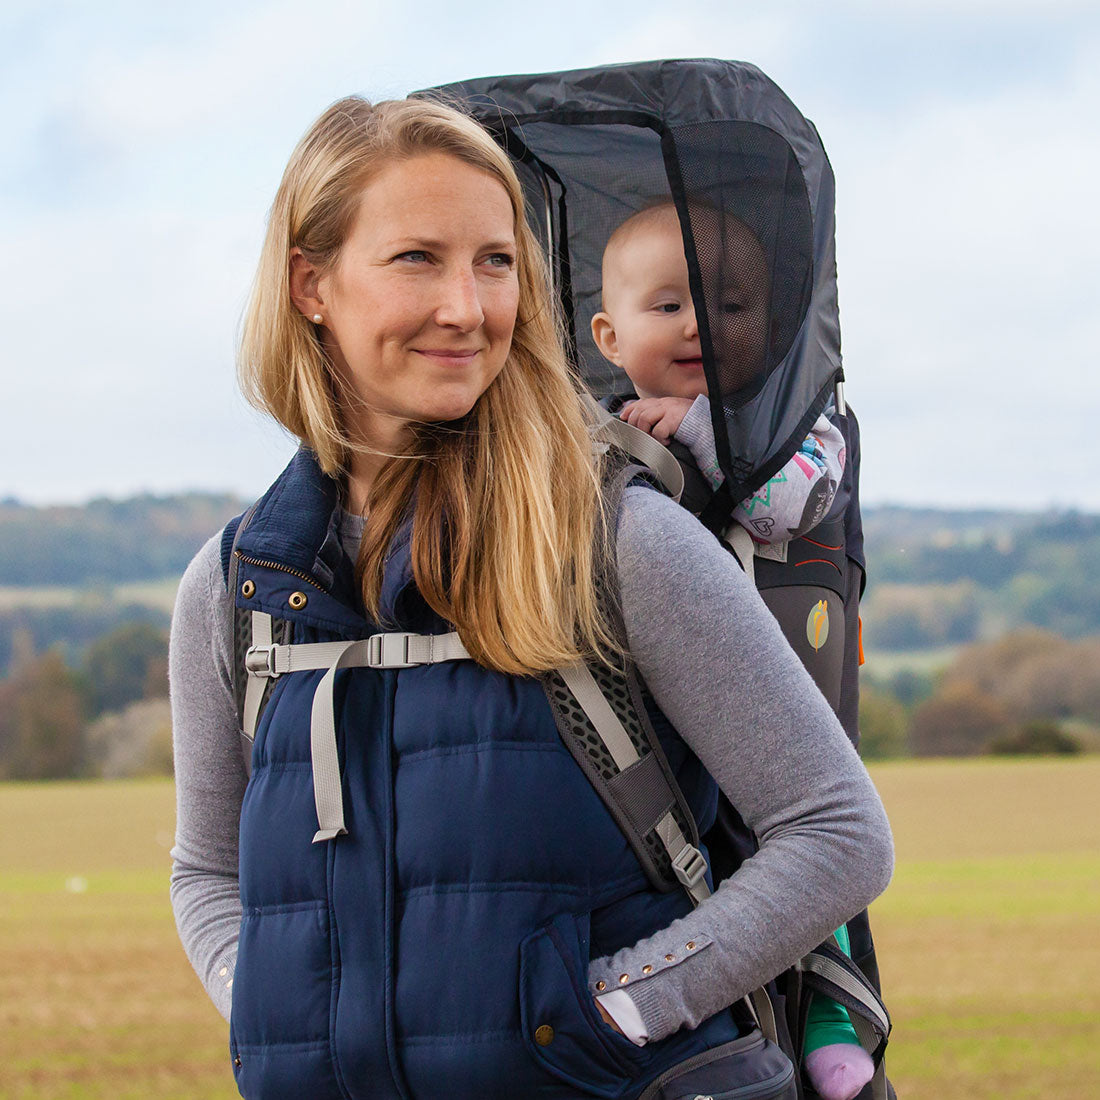 Accessories for Child Carrier | LittleLife